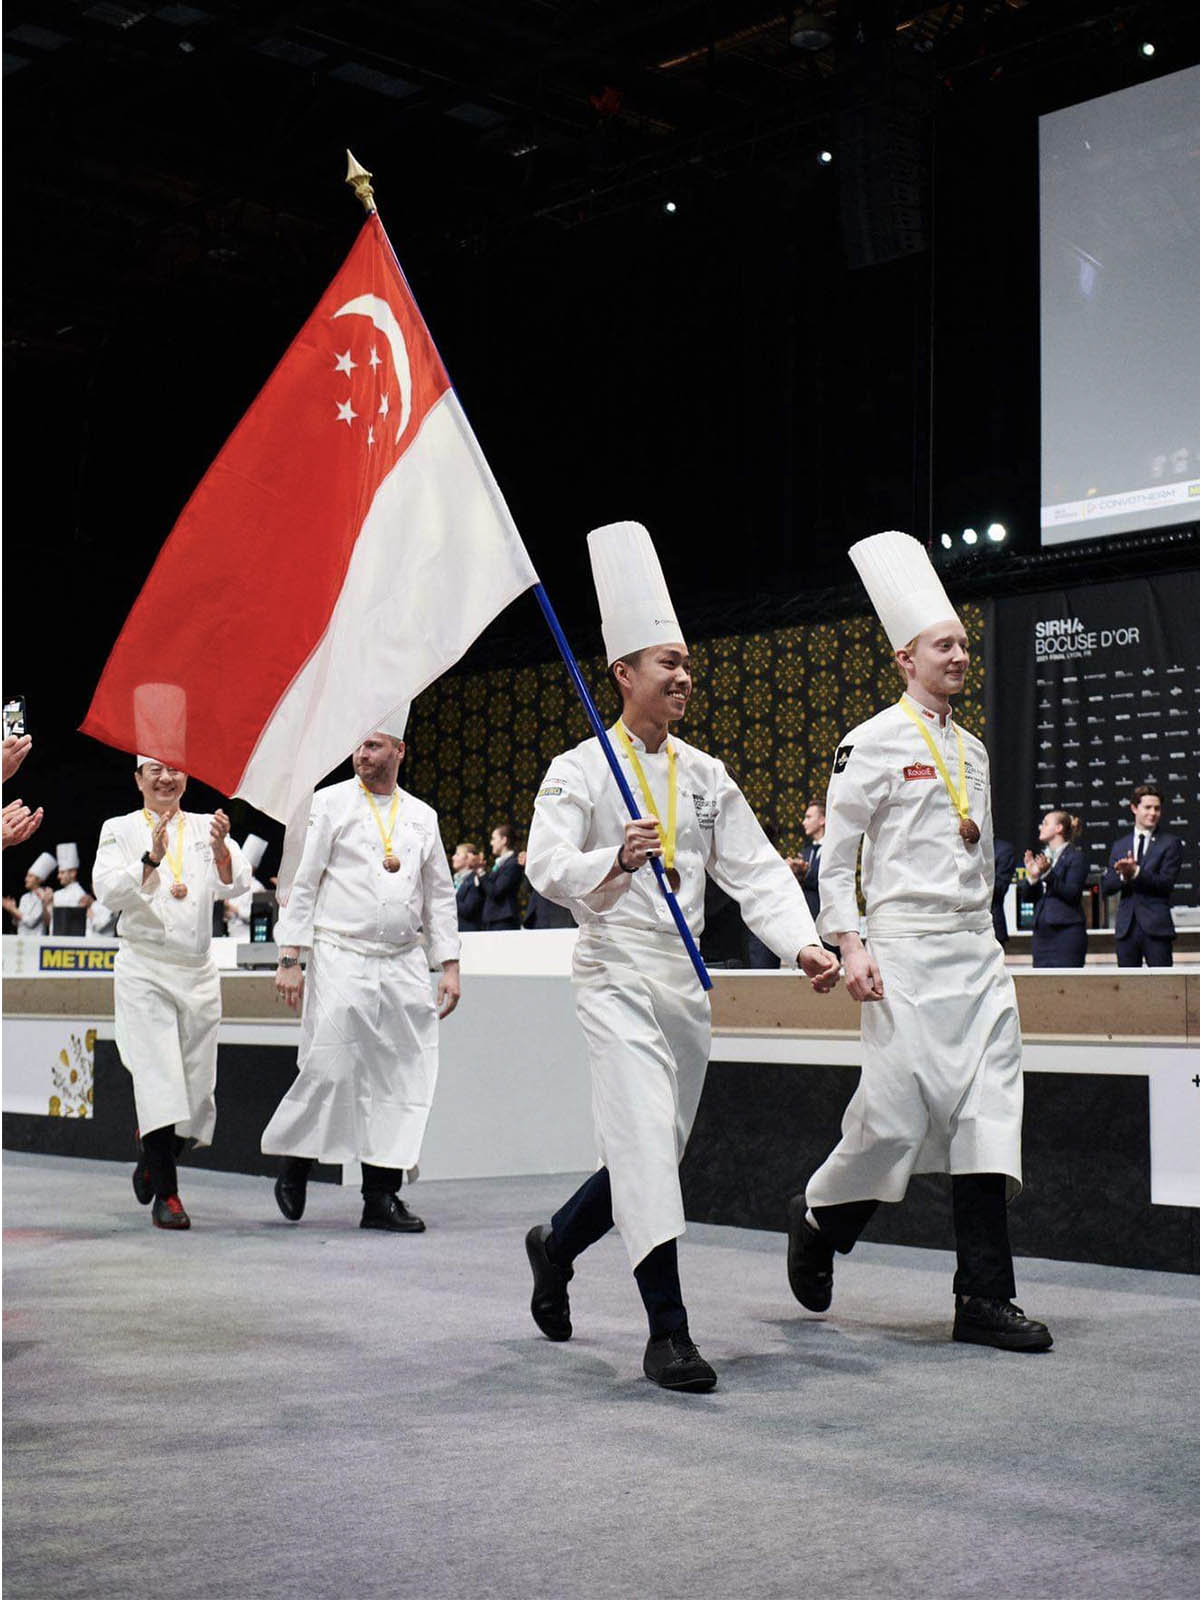 13 Acclaimed Chefs from Bocuse d’Or Singapore Academy Declare Support for Mathew Leong
